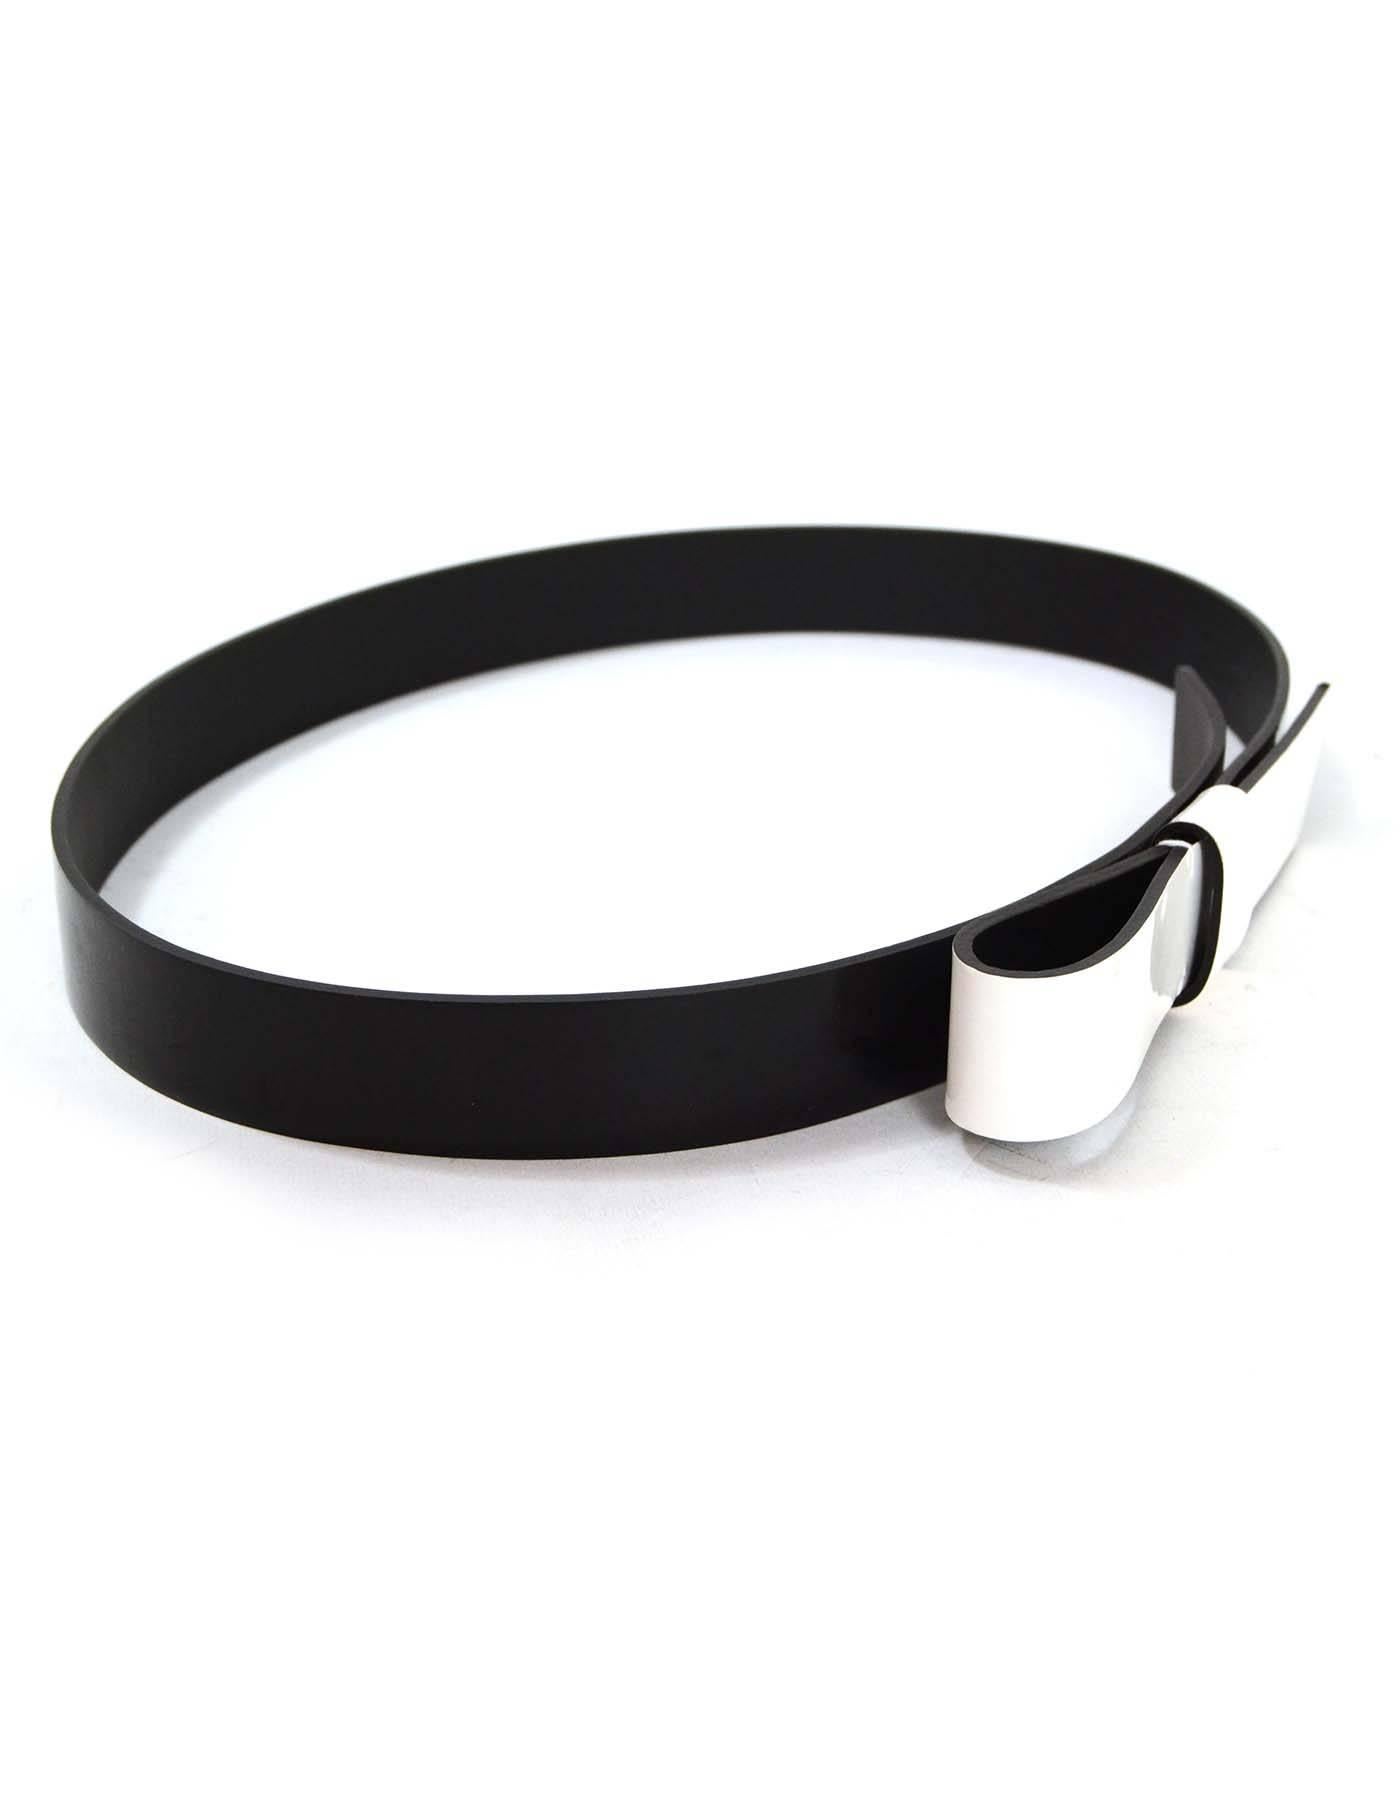 Lanvin Black & White Patent Belt sz S rt. $495 In Excellent Condition In New York, NY